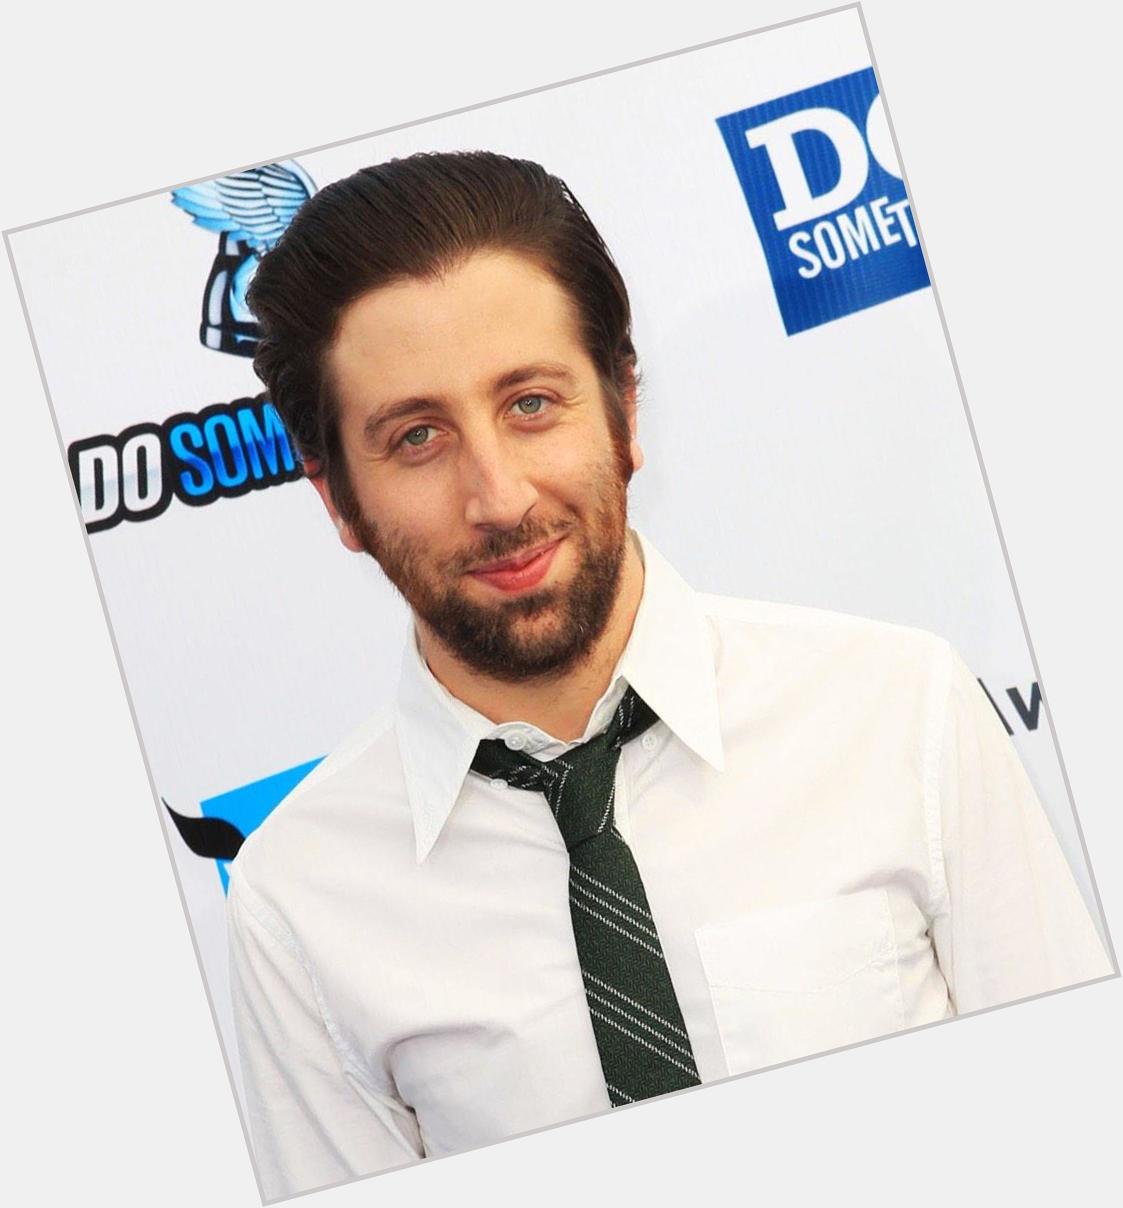 Happy birthday simon Helberg . What a legend with your comedy on 